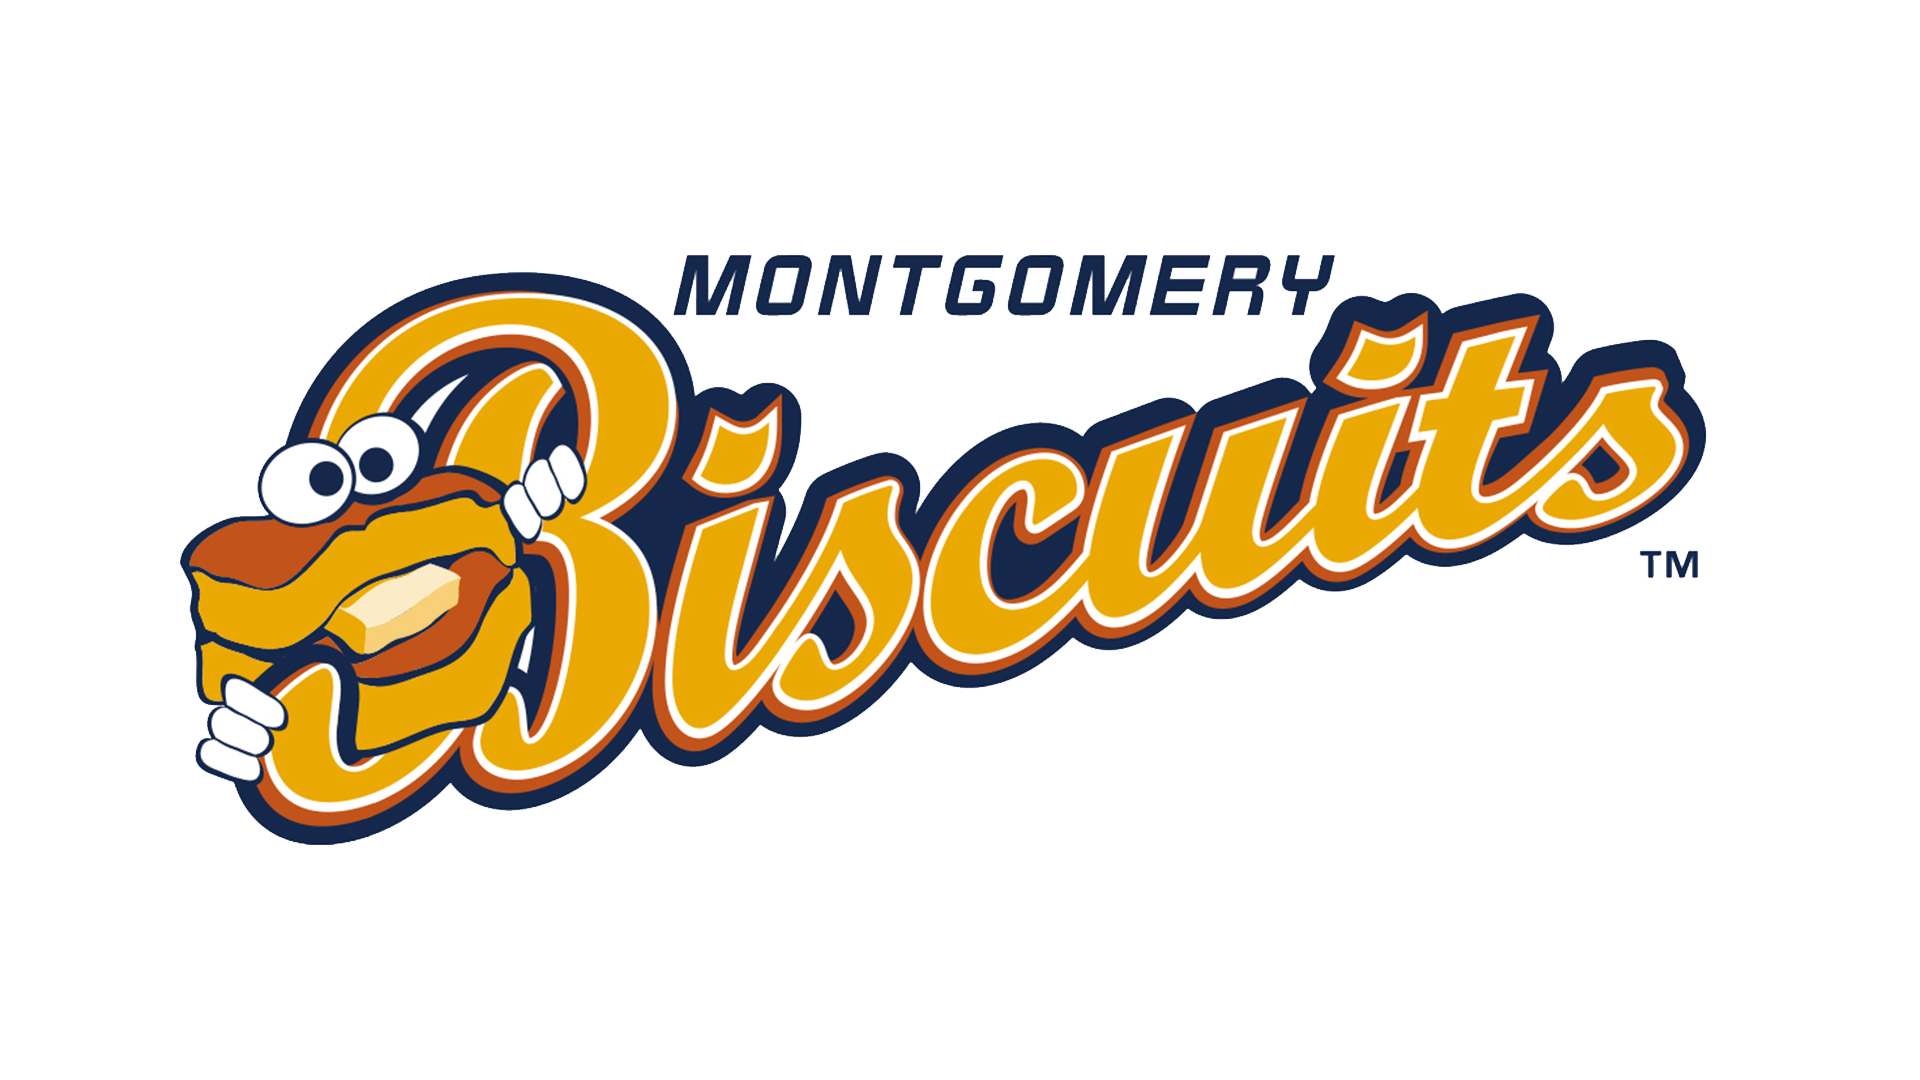 Biscuits Logo - Meaning Montgomery Biscuits logo and symbol | history and evolution